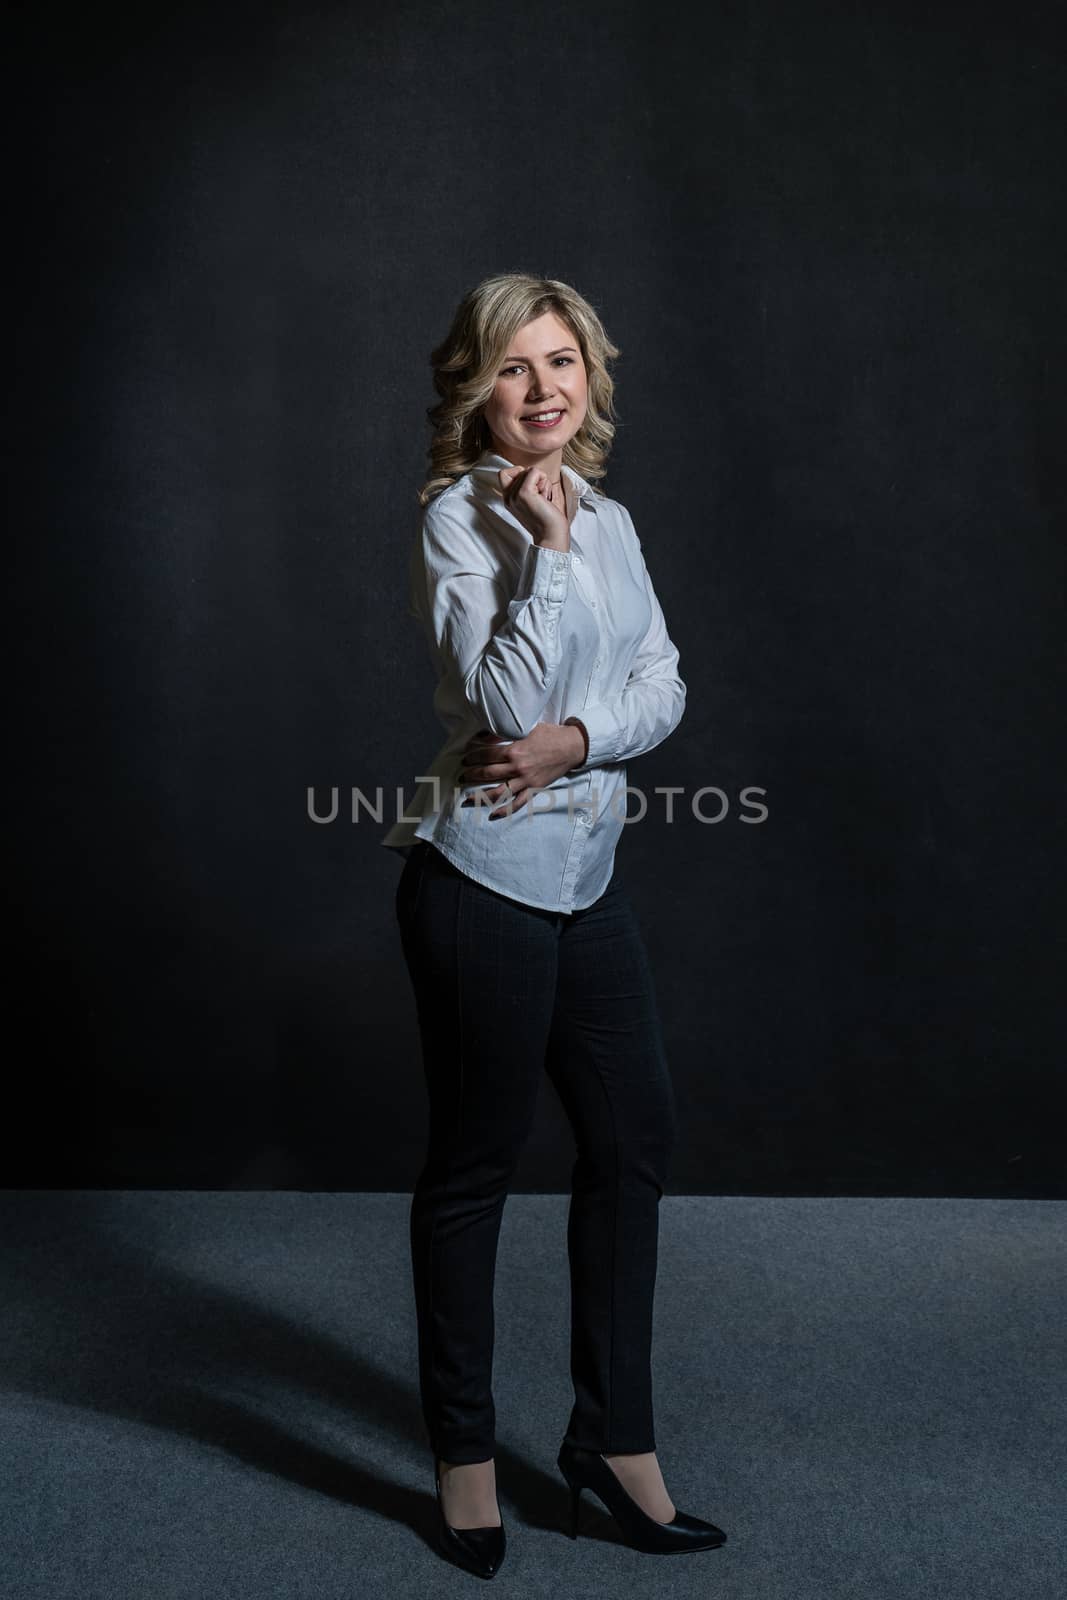 30 years old woman with blond hair in a white shirt posing in the studio on a dark background